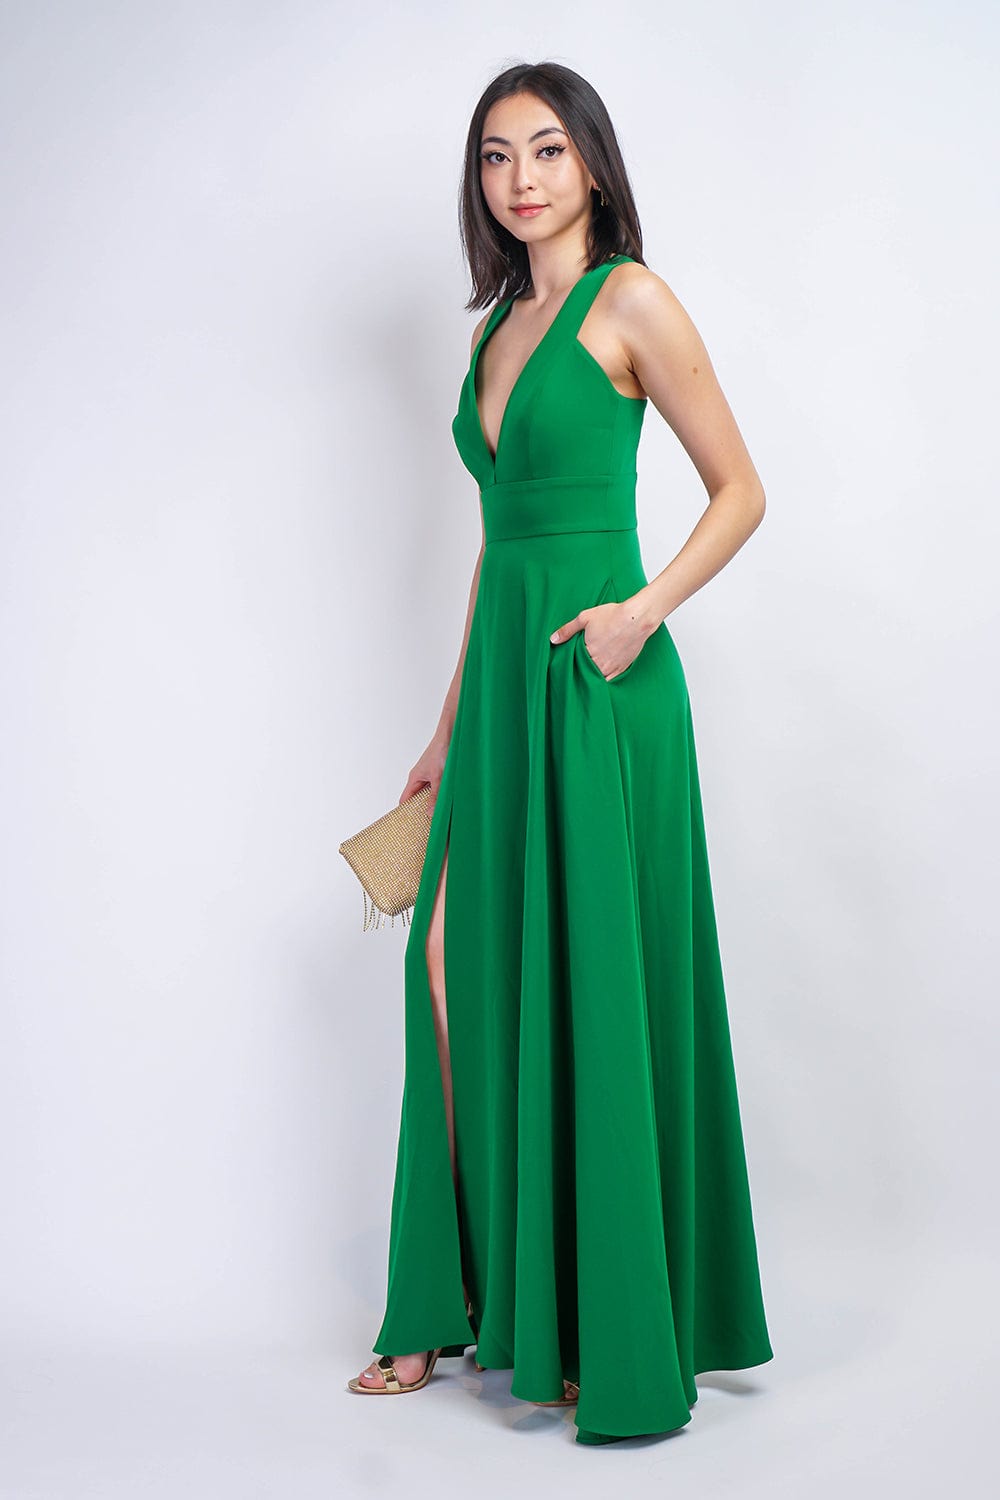 GOWNS Kelly Green V Neck Front Slit Soraya Gown - Chloe Dao